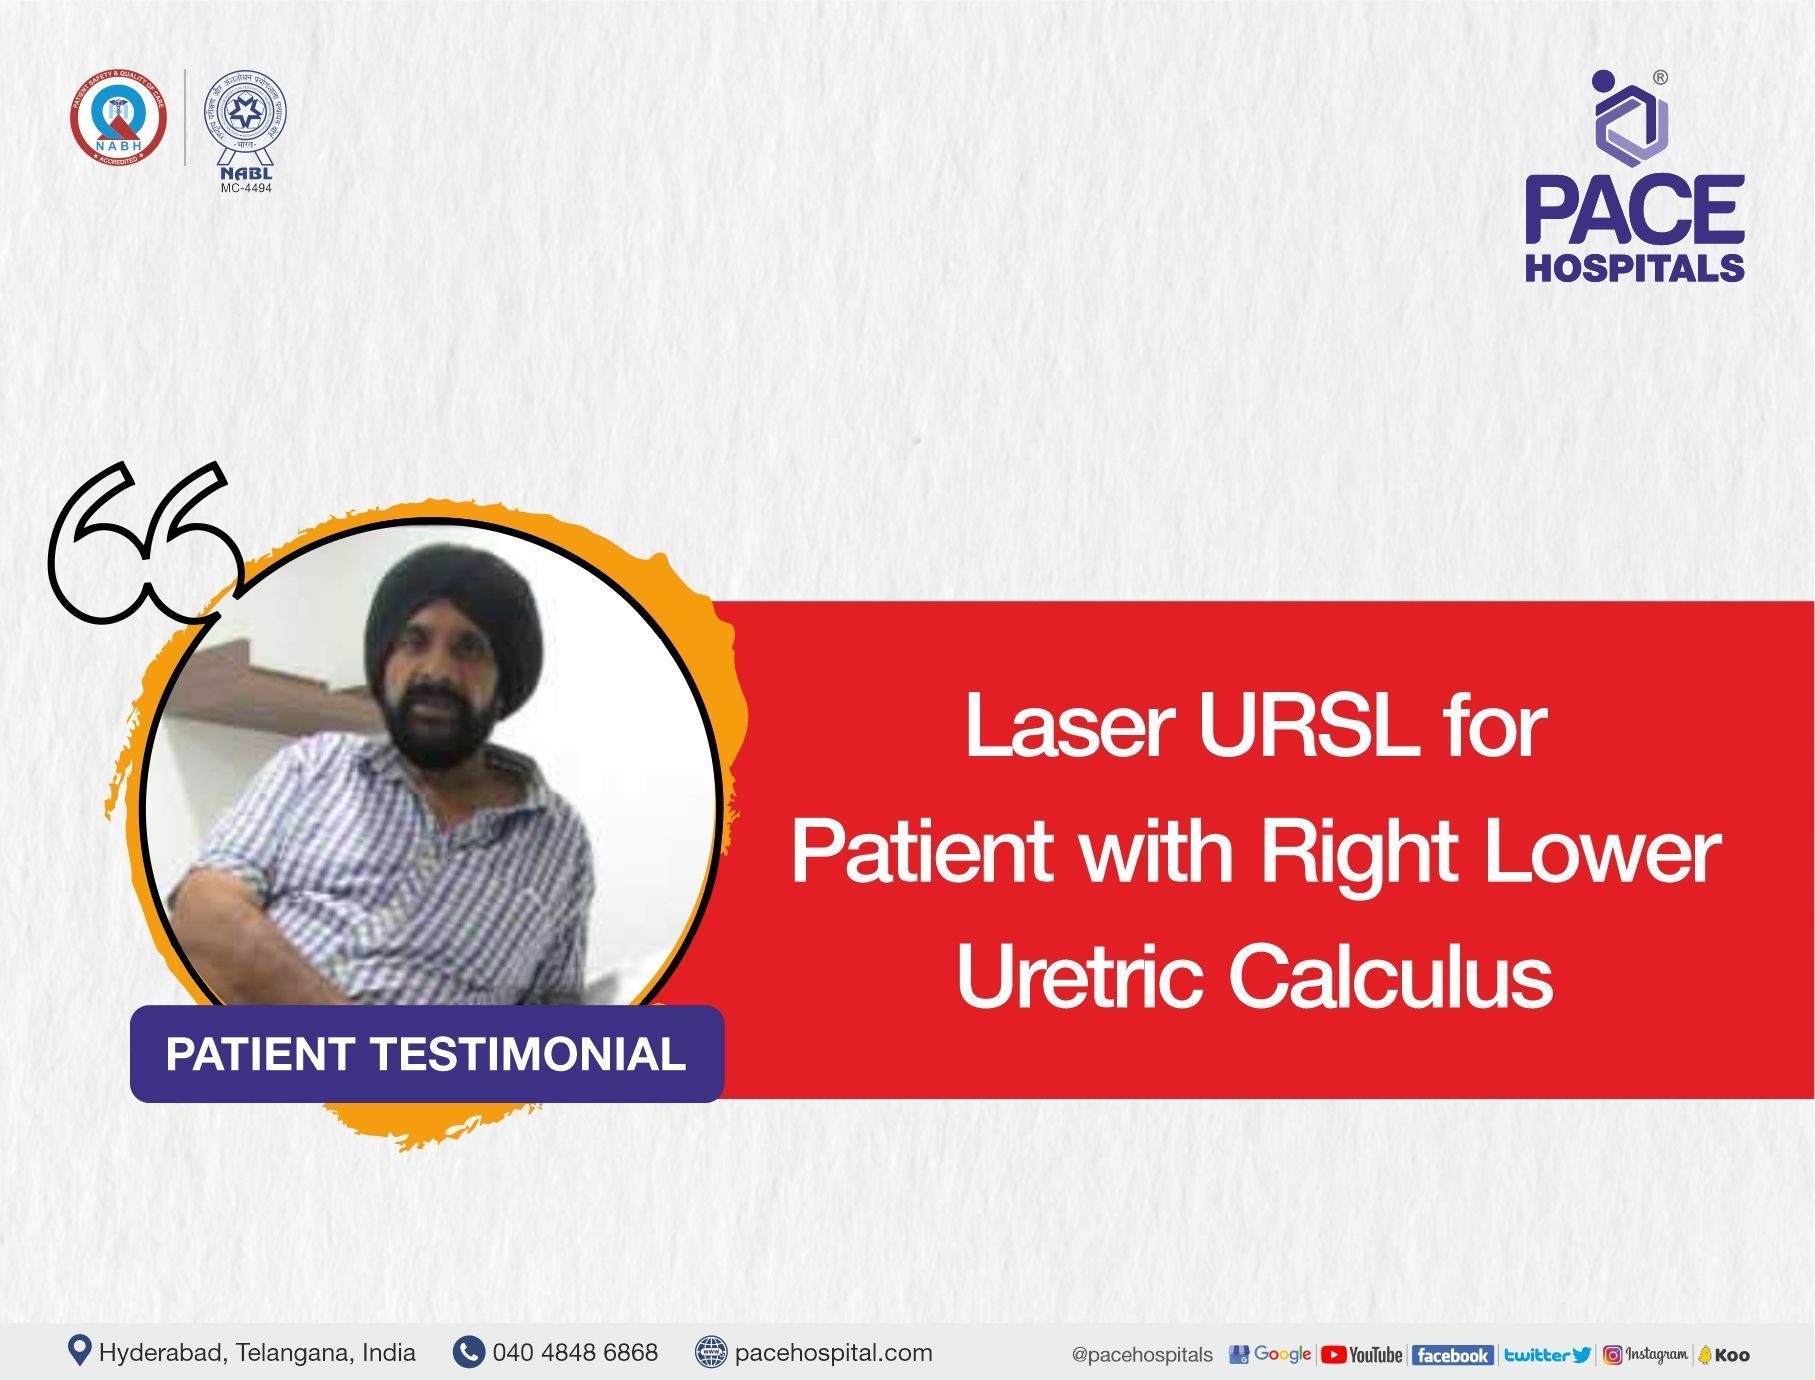 Laser URSL for Patient with Right Lower Uretric Calculus